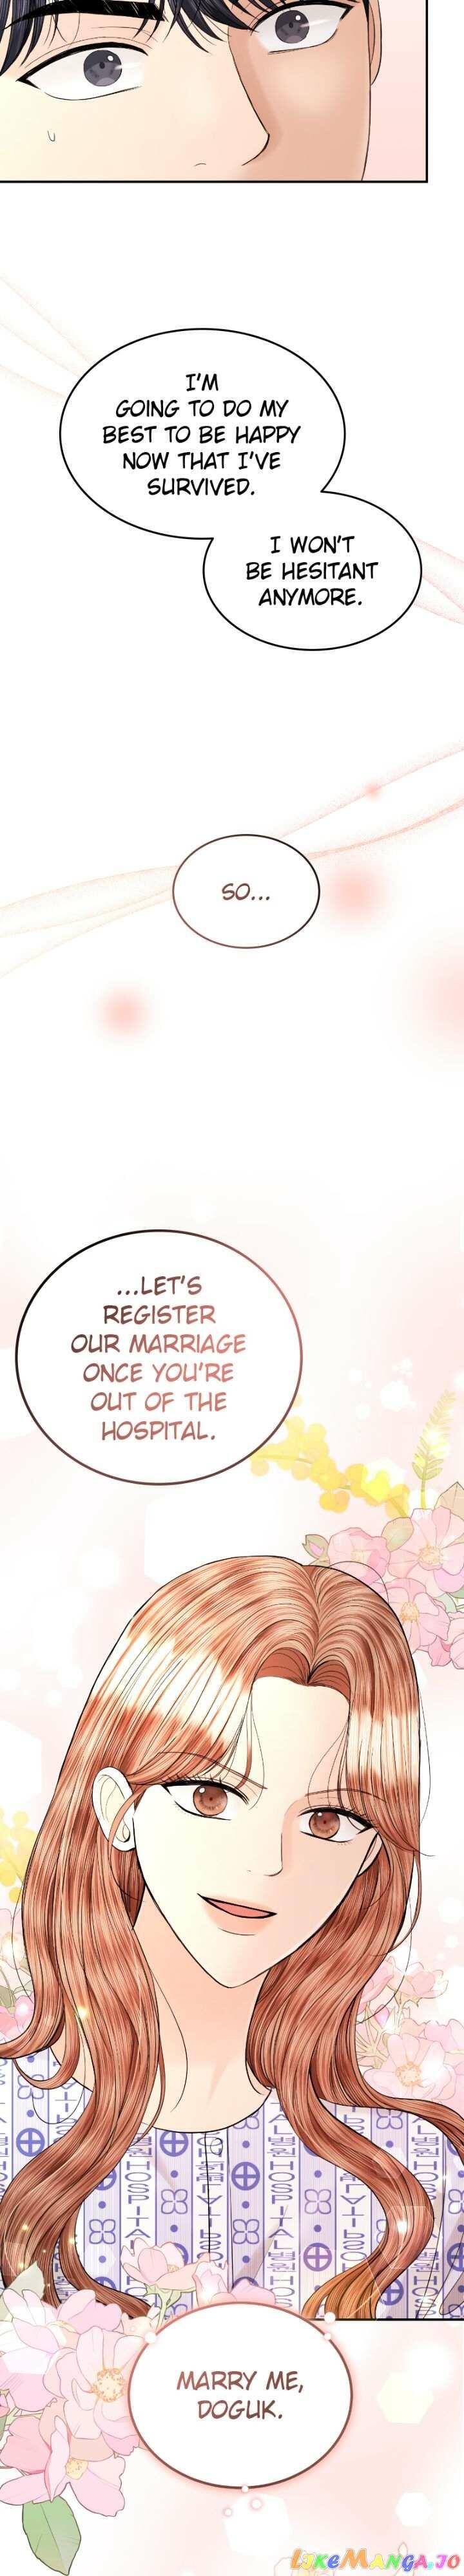 The Essence Of A Perfect Marriage Chapter 106 page 32 - Mangakakalot